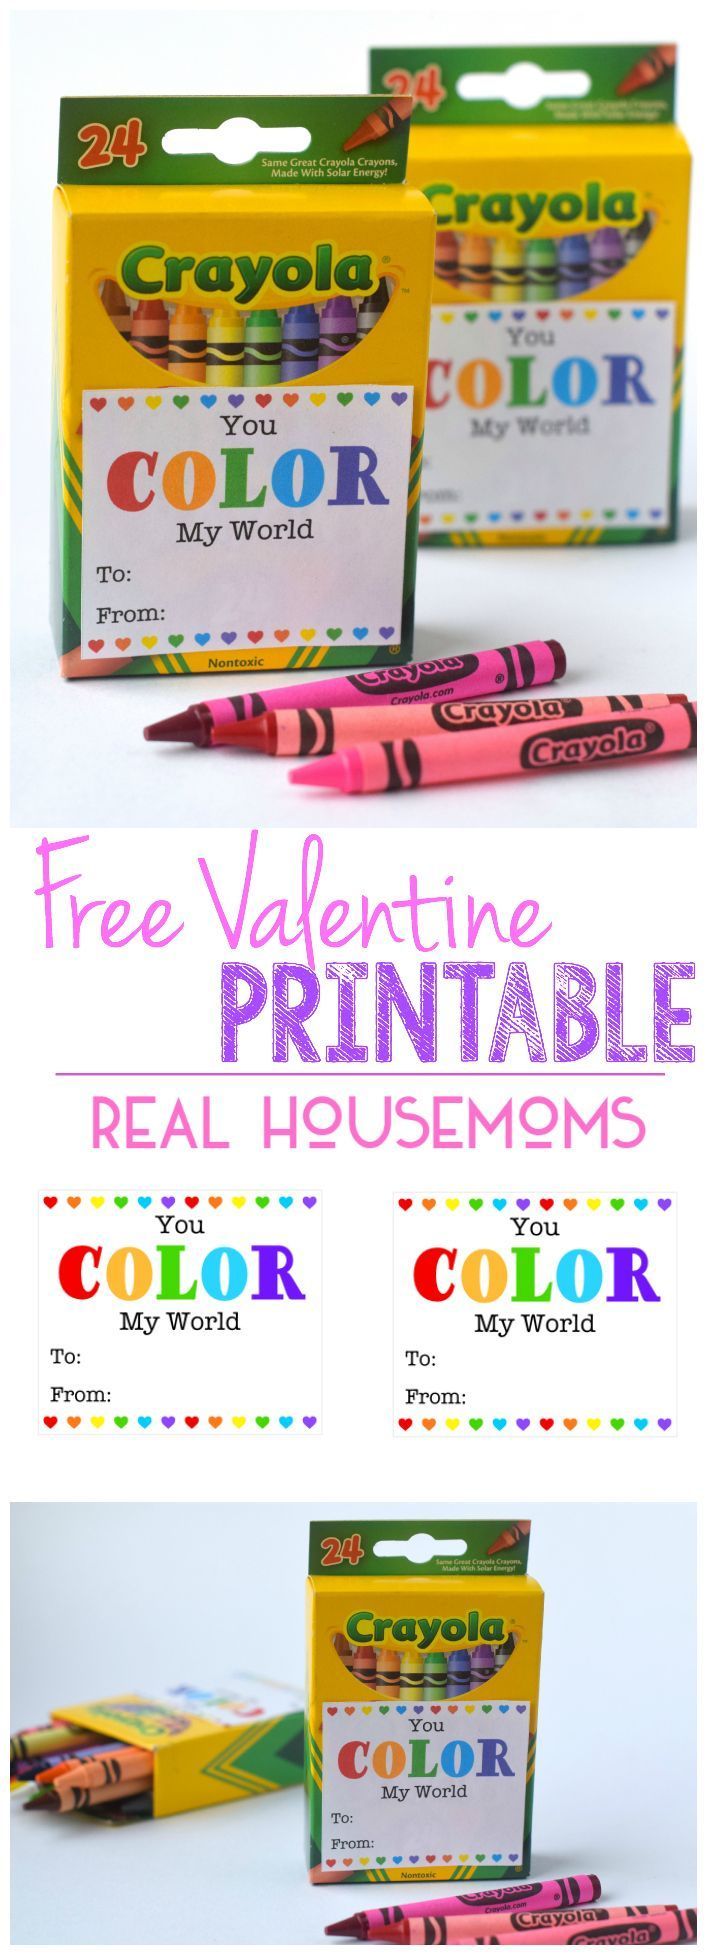 This super cute FREE PRINTABLE VALENTINE makes creating Valentines for a class a snap!  Some boxes of crayons, some scissors and